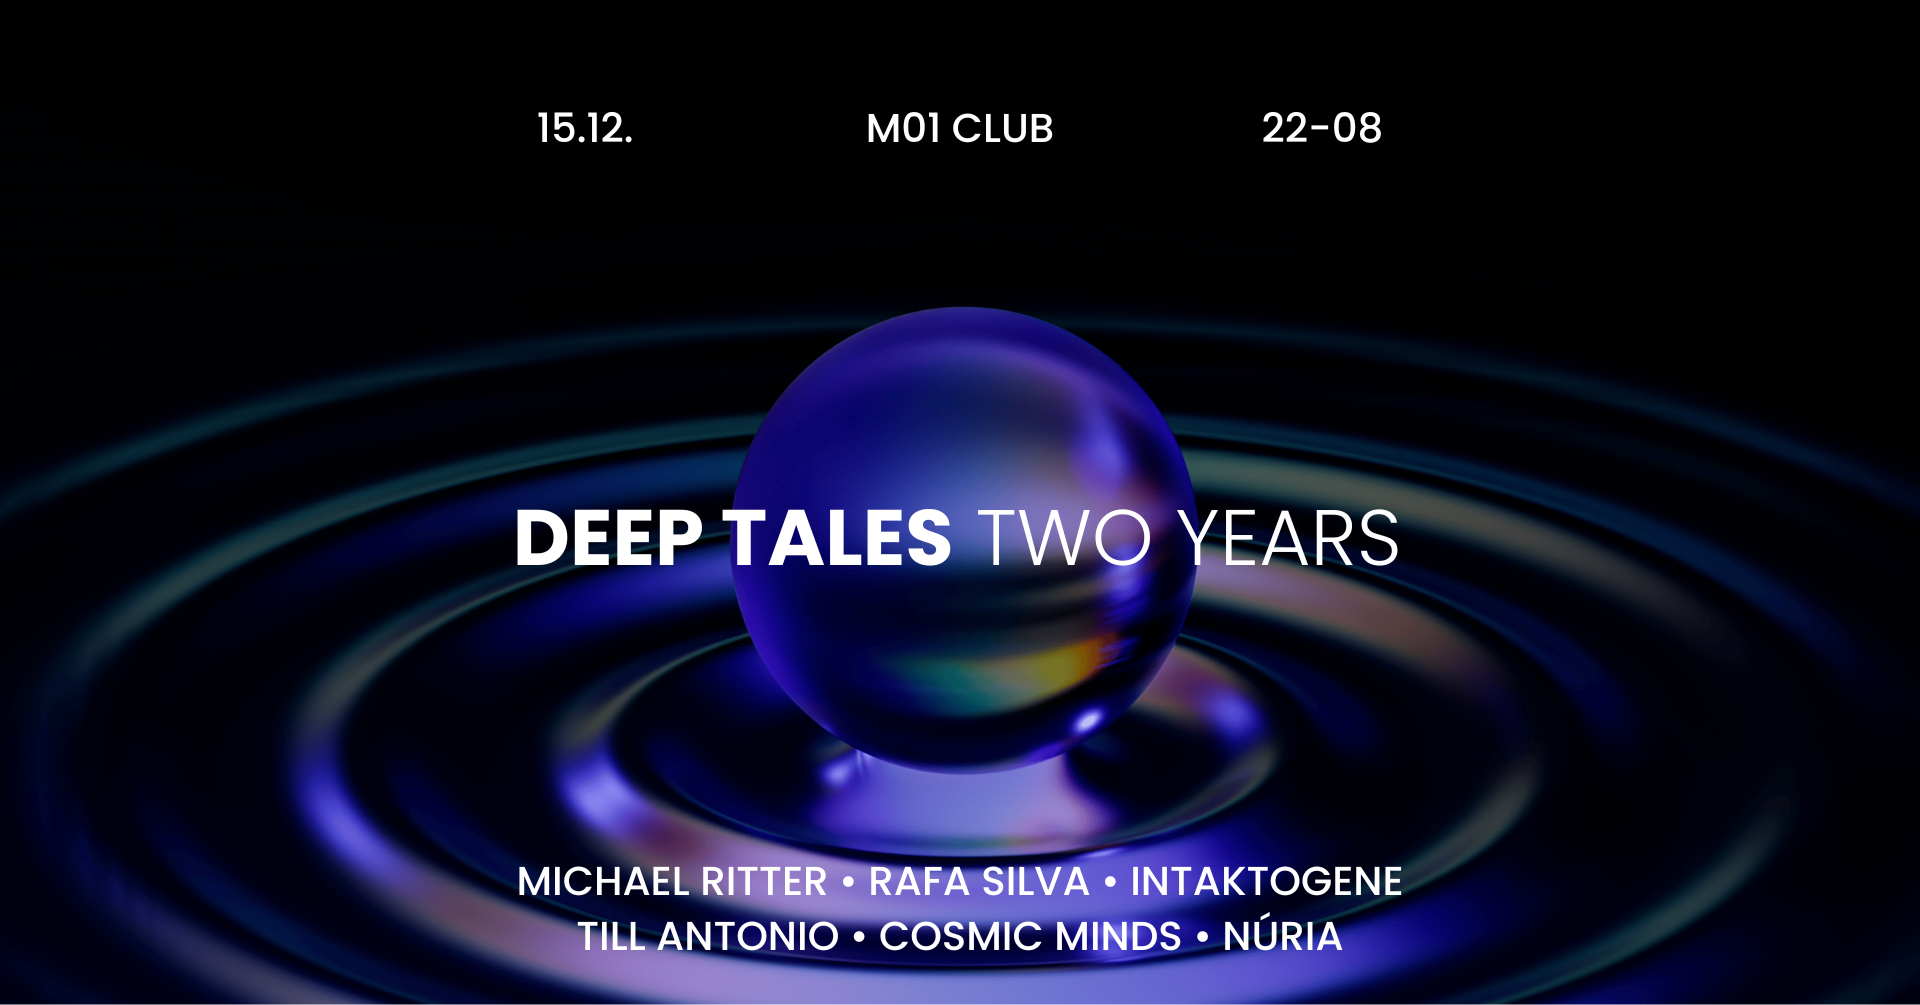 DEEP TALES - TWO YEARS with Intaktogene, Núria, Till Antonio, Cosmic Minds & many more - フライヤー表